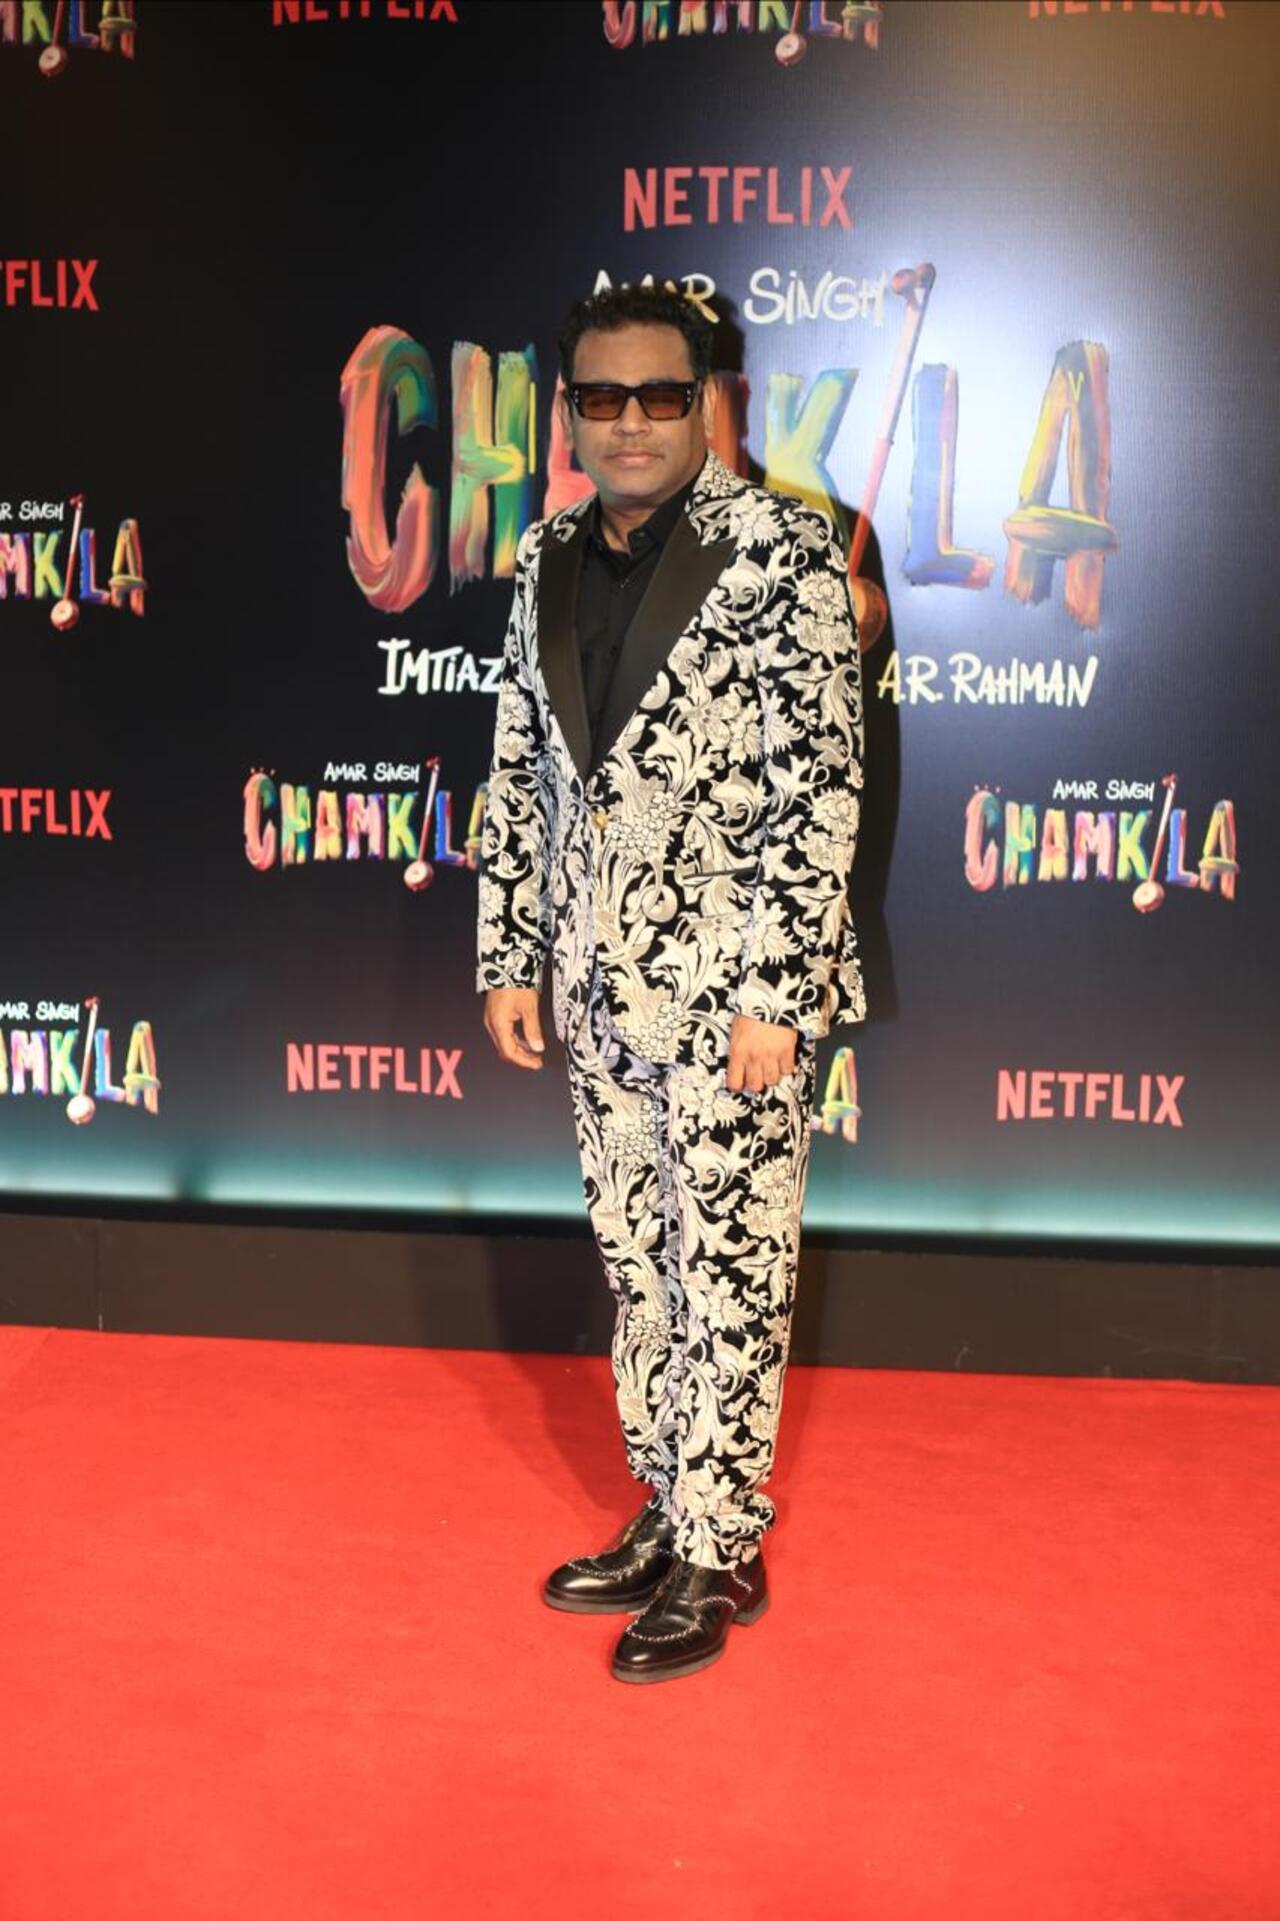 Musician AR Rahman who worked on the score of Chamkila also suited up for the grand evening